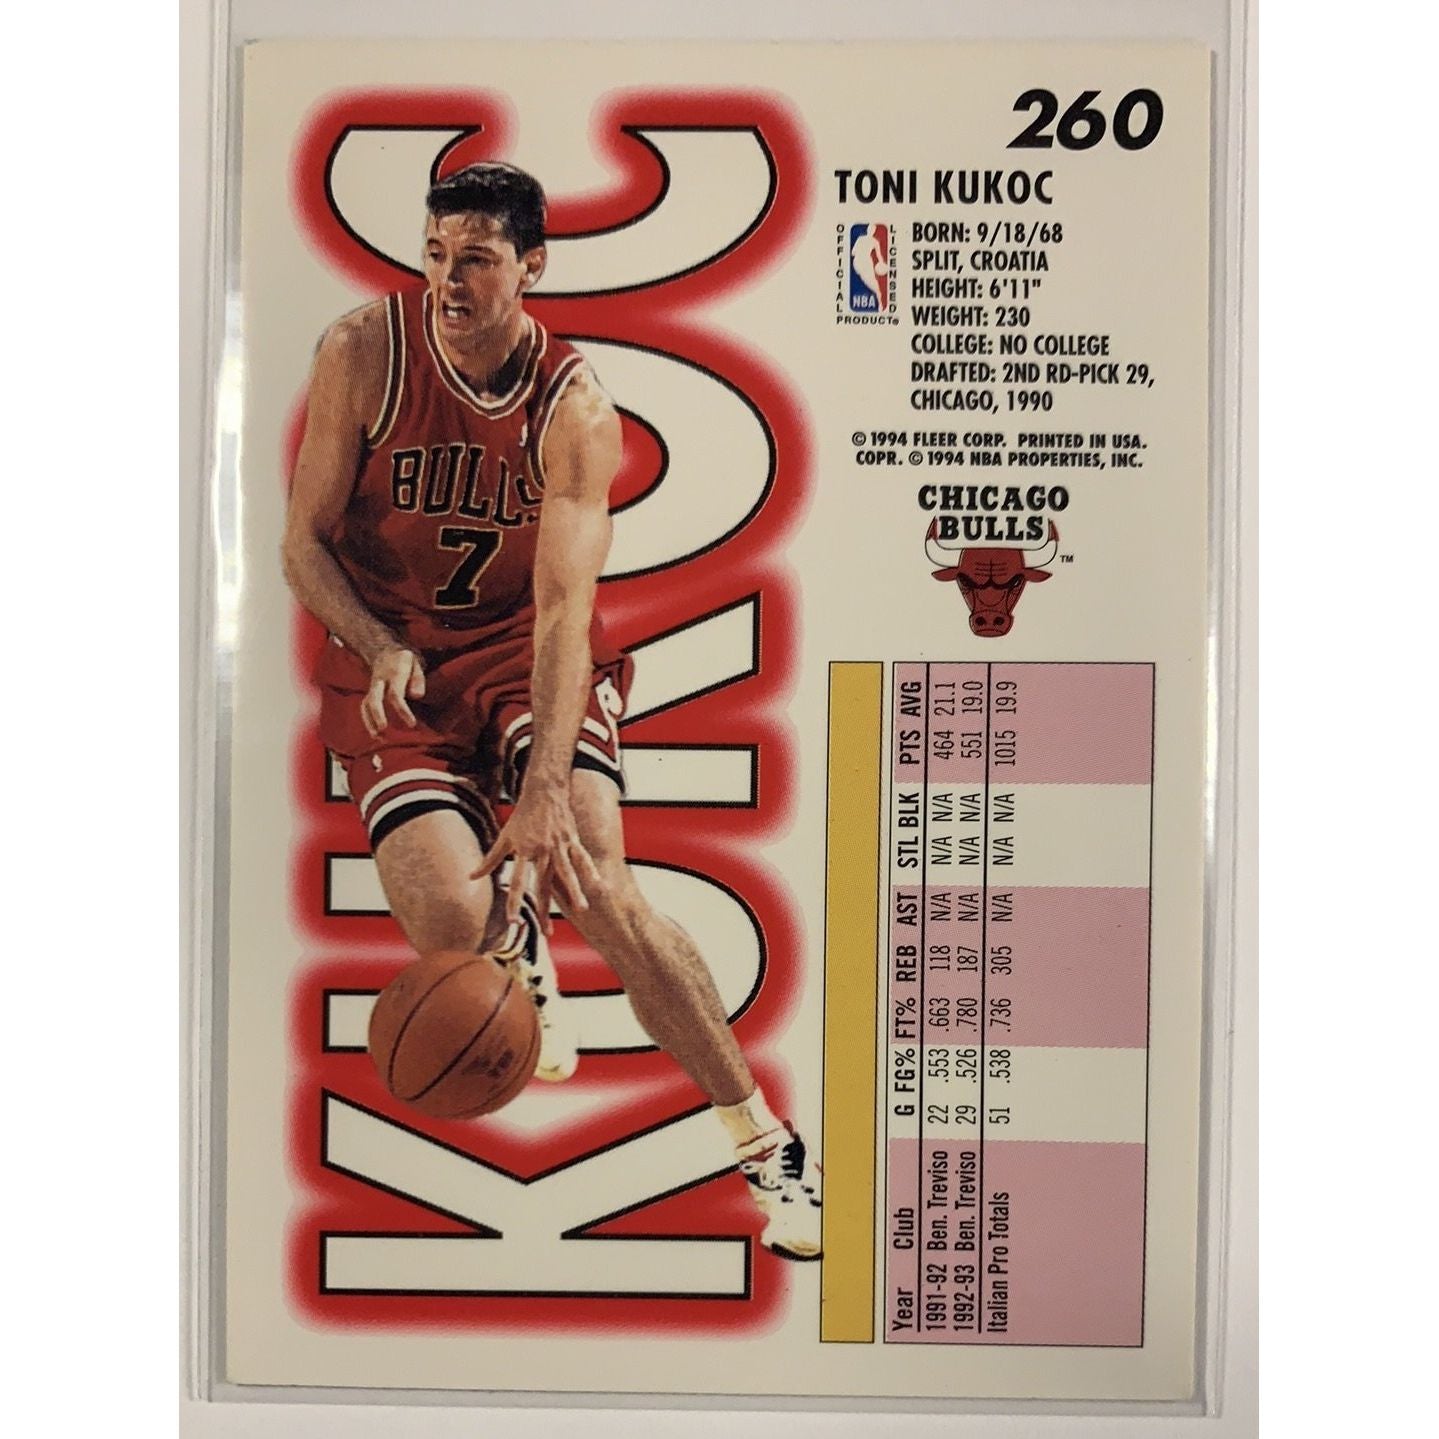  1993-94 Fleer Toni Kukoc Rookie Card  Local Legends Cards & Collectibles